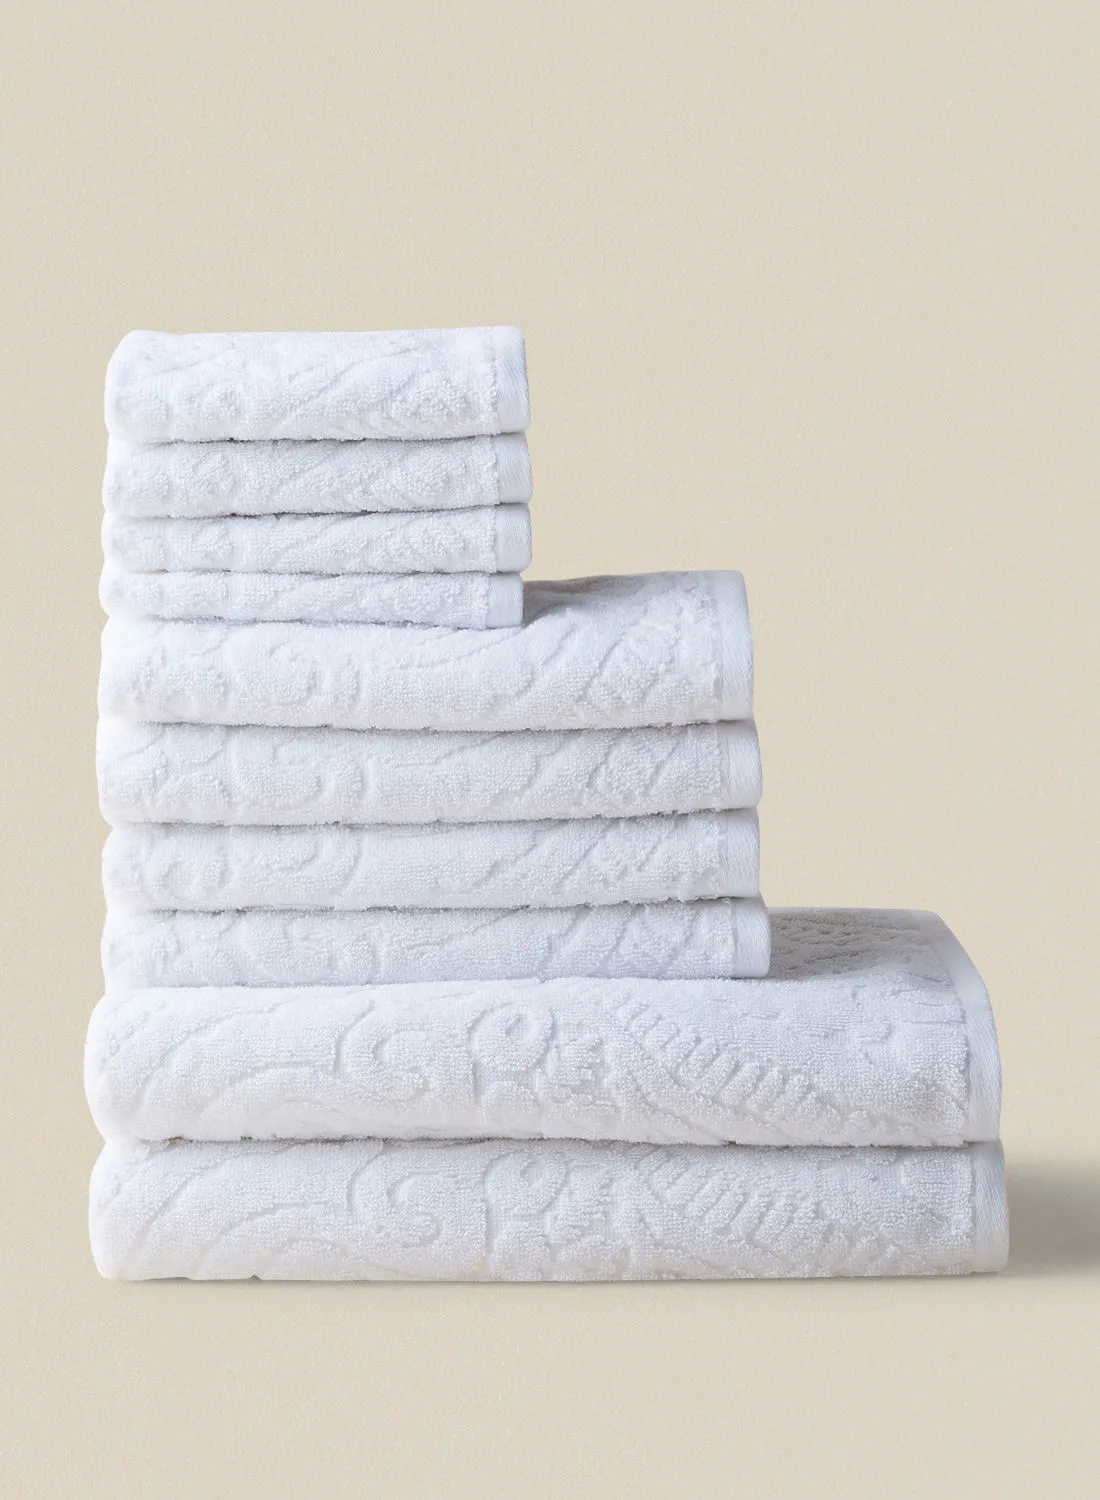 noon east 10 Piece Bathroom Towel Set - 500 GSM 100% Cotton - 4 Hand Towel - 4 Face Towel - 2 Bath Towel - White Color - Highly Absorbent - Fast Dry